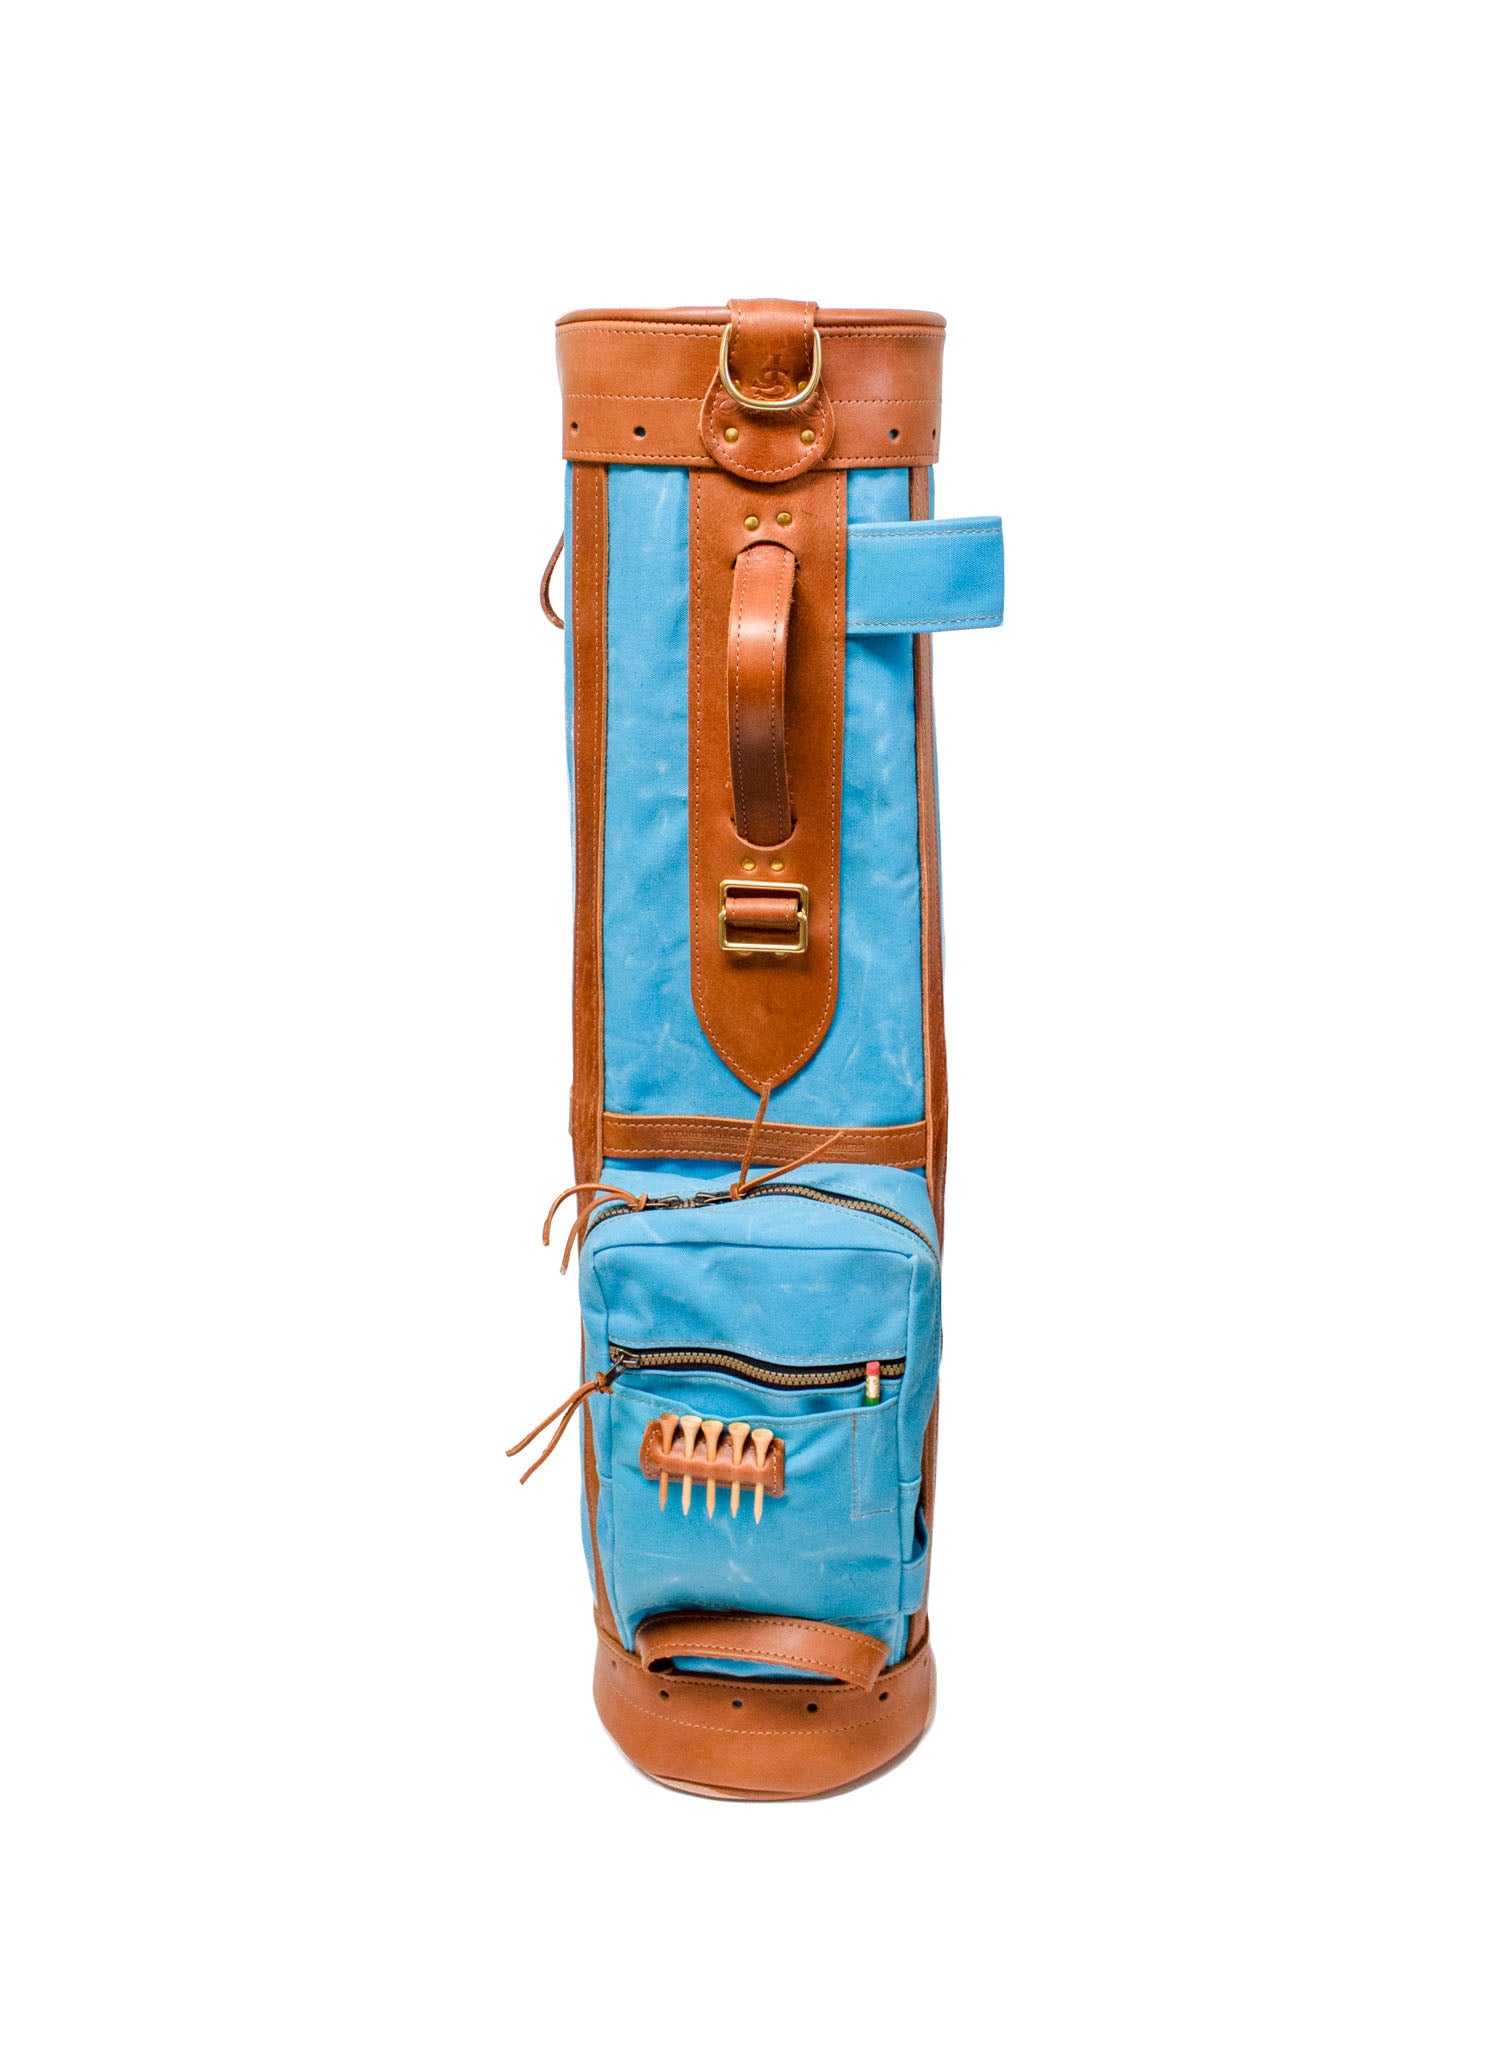  Light Blue with Natural Leather Sunday Style Golf Bag- Steurer & Jacoby